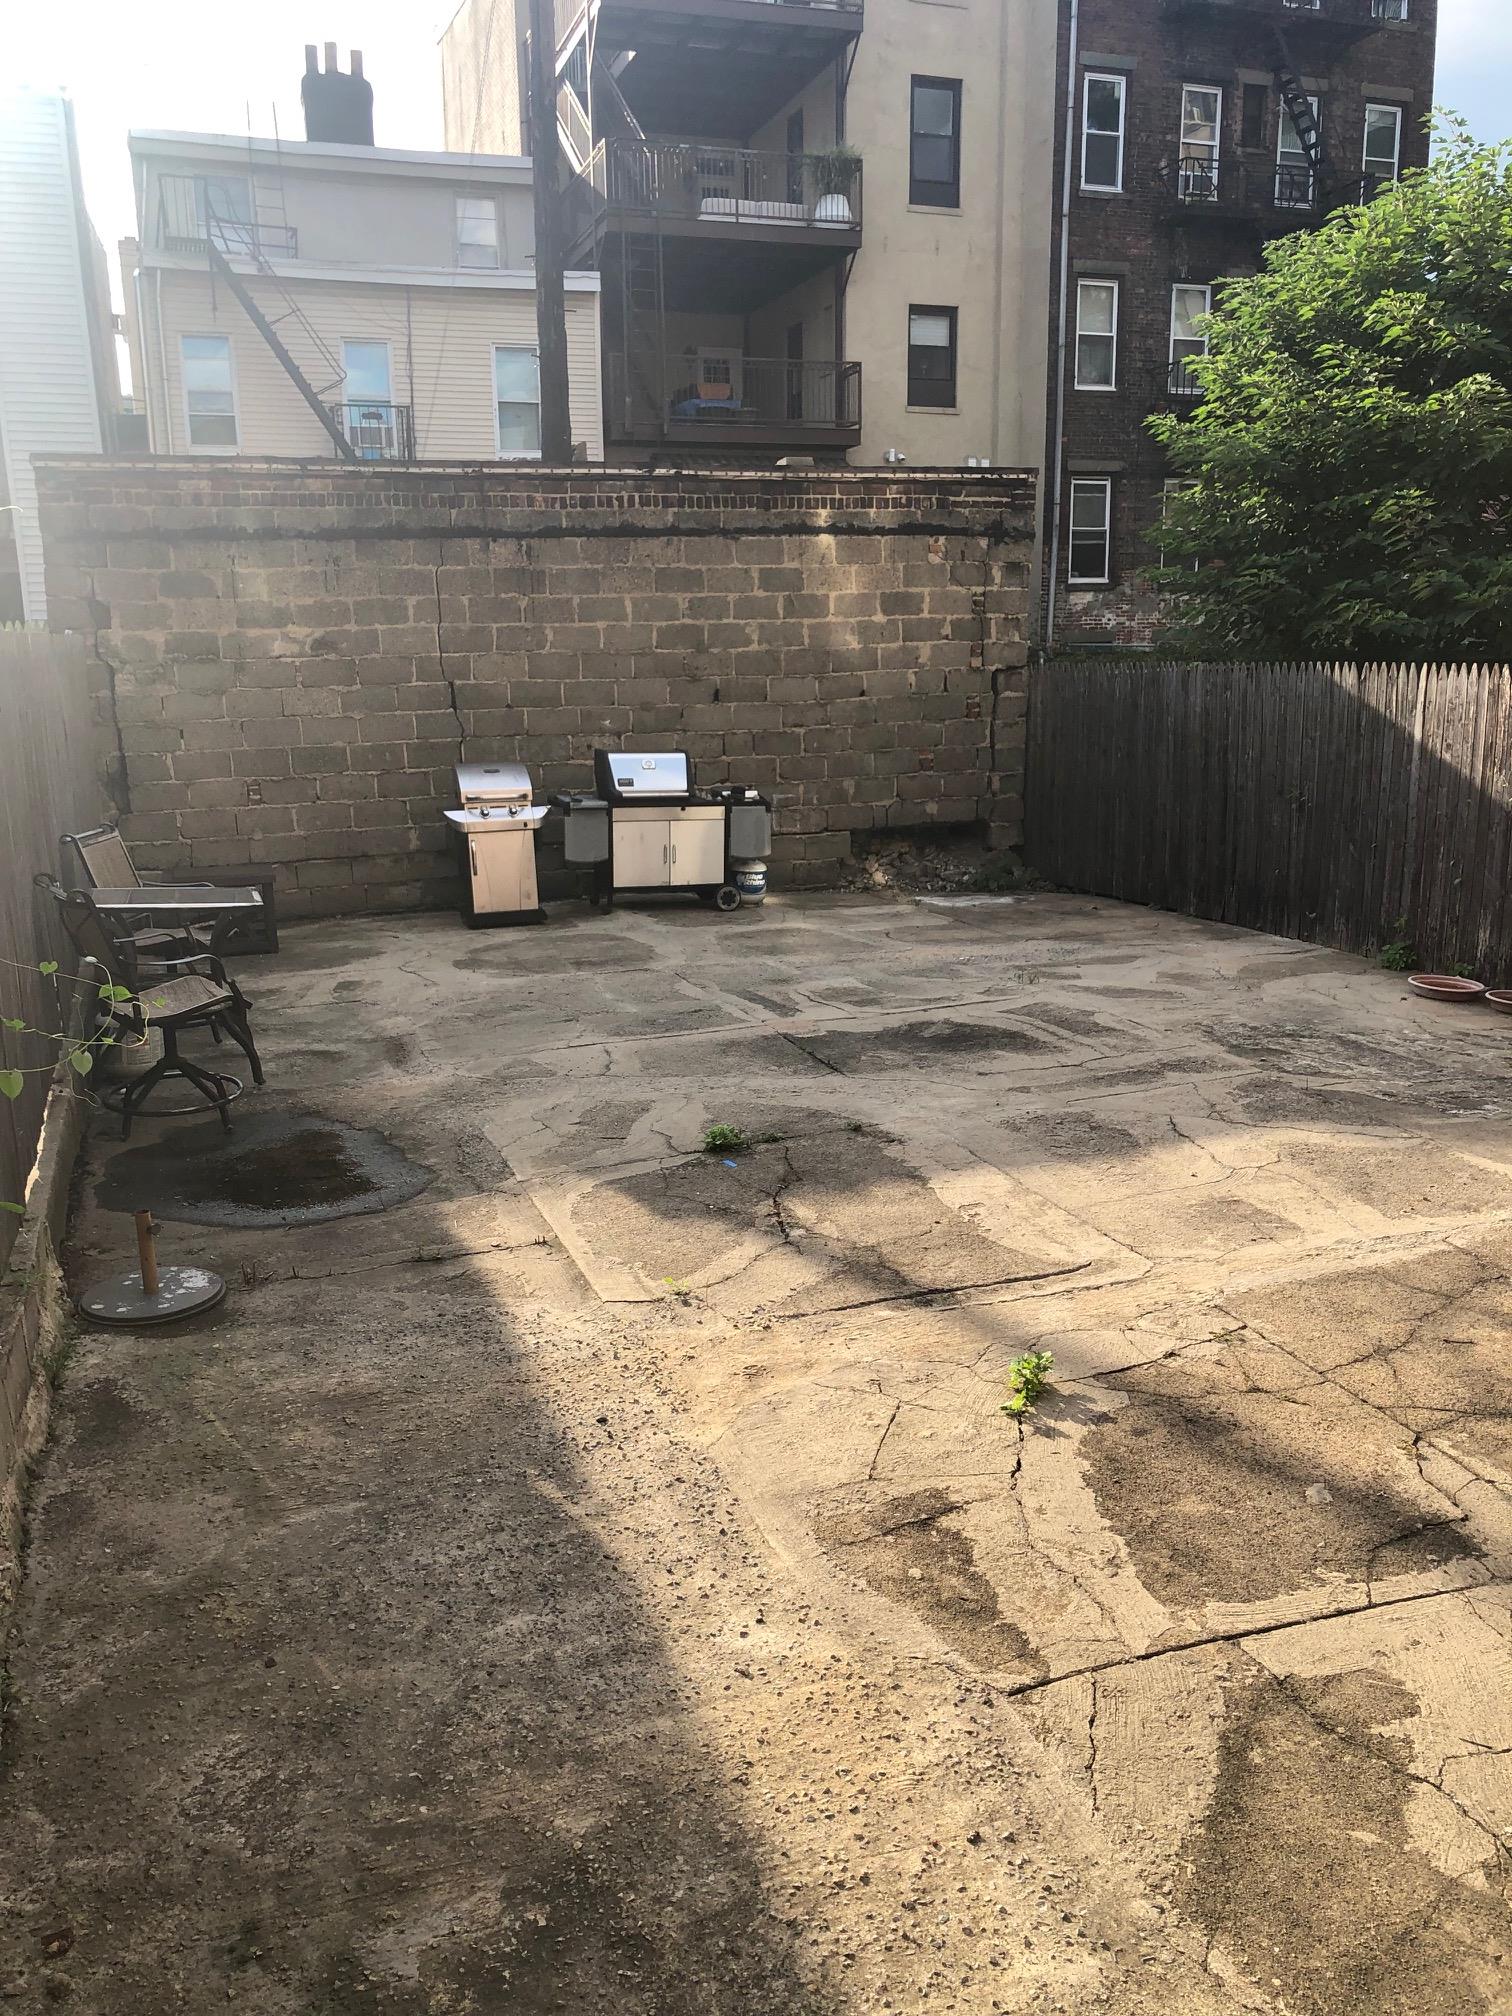 Amazing priced 2 bedroom featuring; hardwood floor, semi updated kitchen, shared backyard, shared laundry and a great location. This bright apartment features a skylight and is located on the 3rd floor! One of the bedrooms in this apartment is larger than the other but both fit queen beds. Sorry no pets. Available 6/3. One month broker fee.